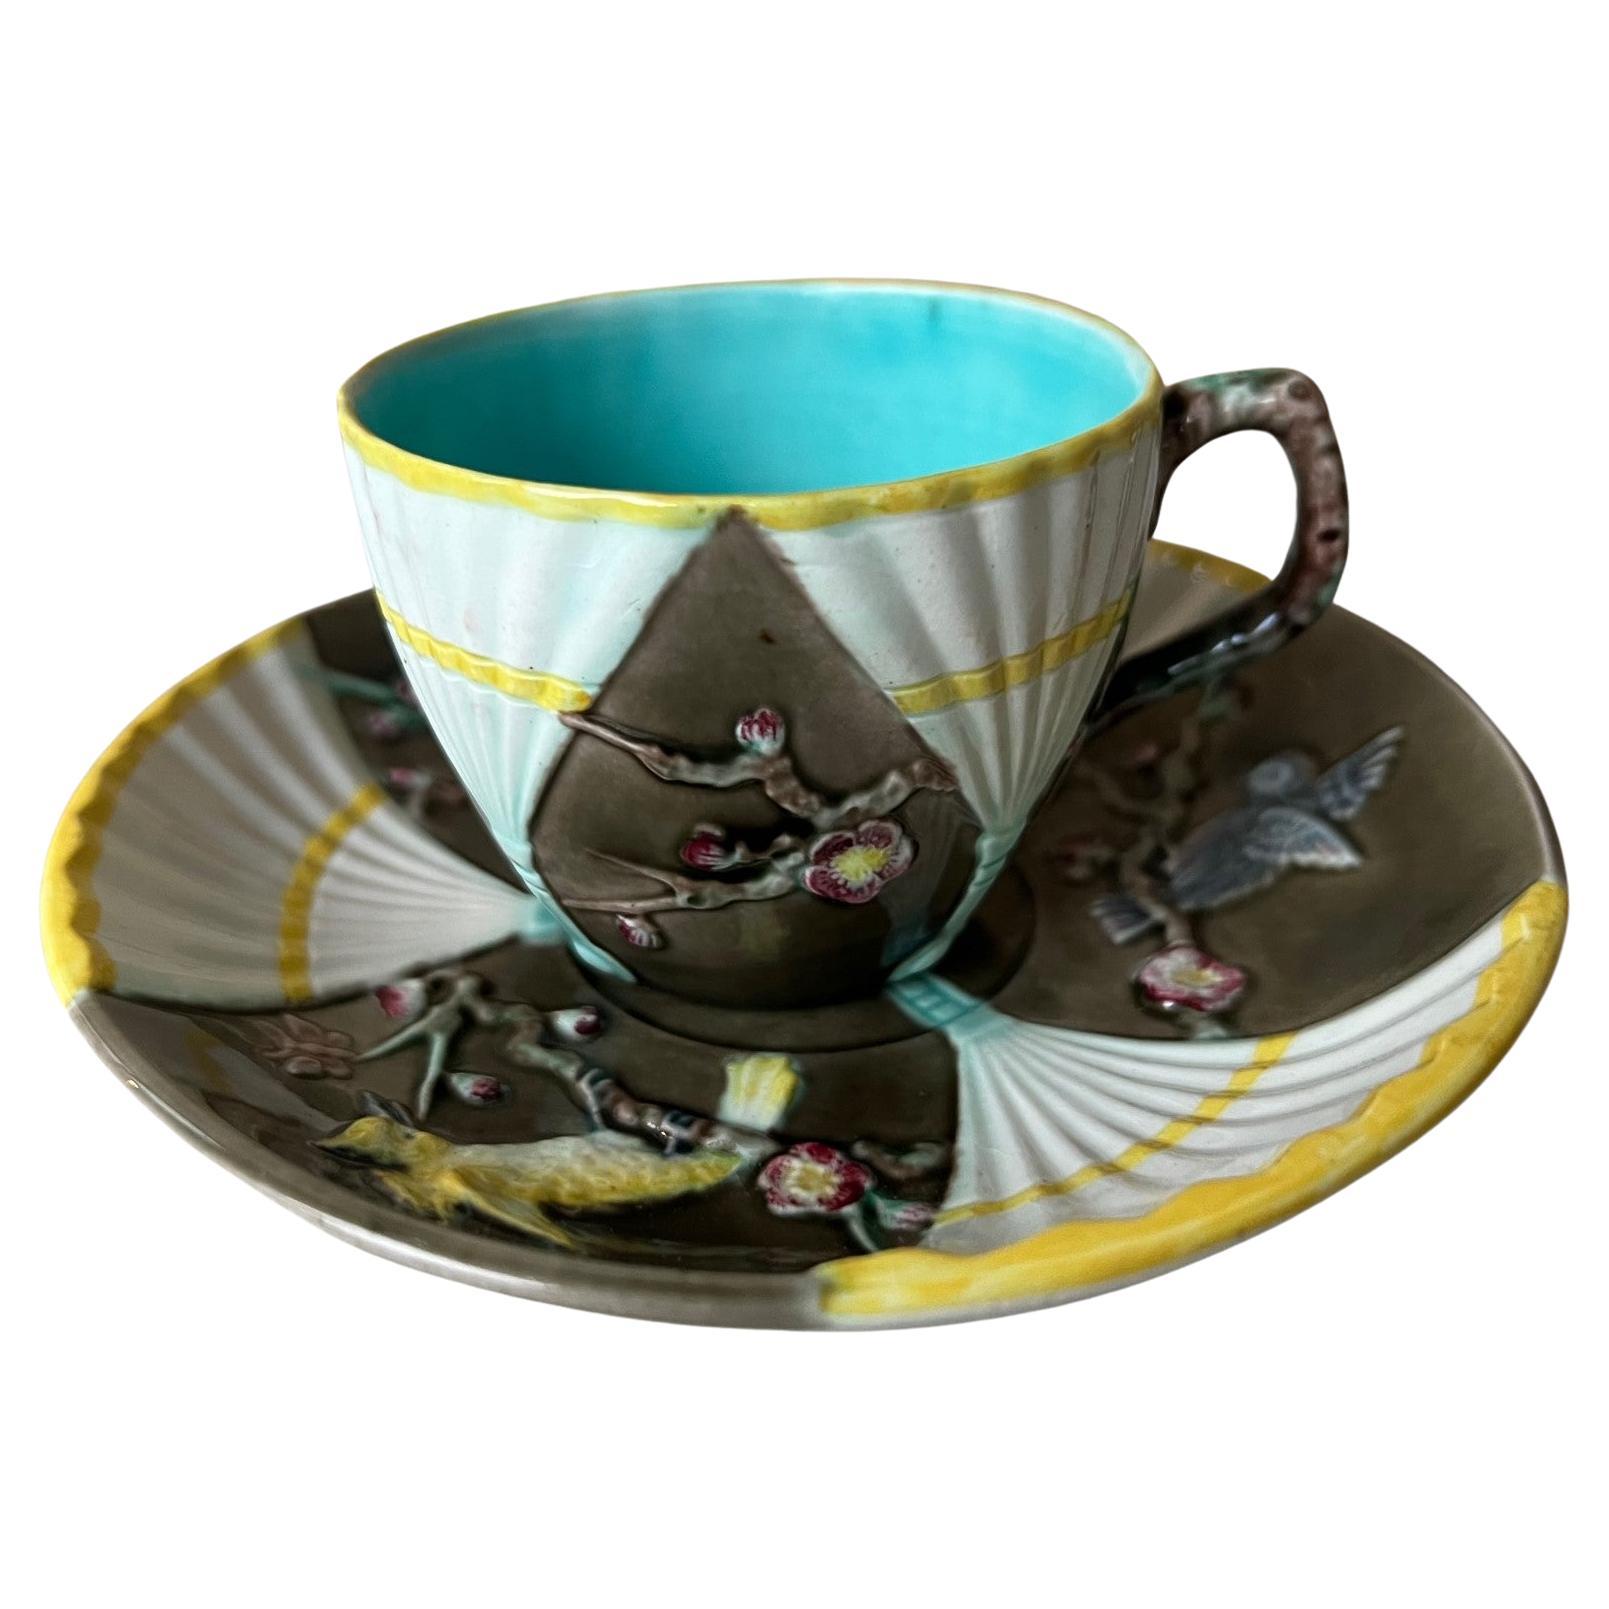 Wedgwood Majolica Fan Pattern Cup and Saucer Set, C. 1876